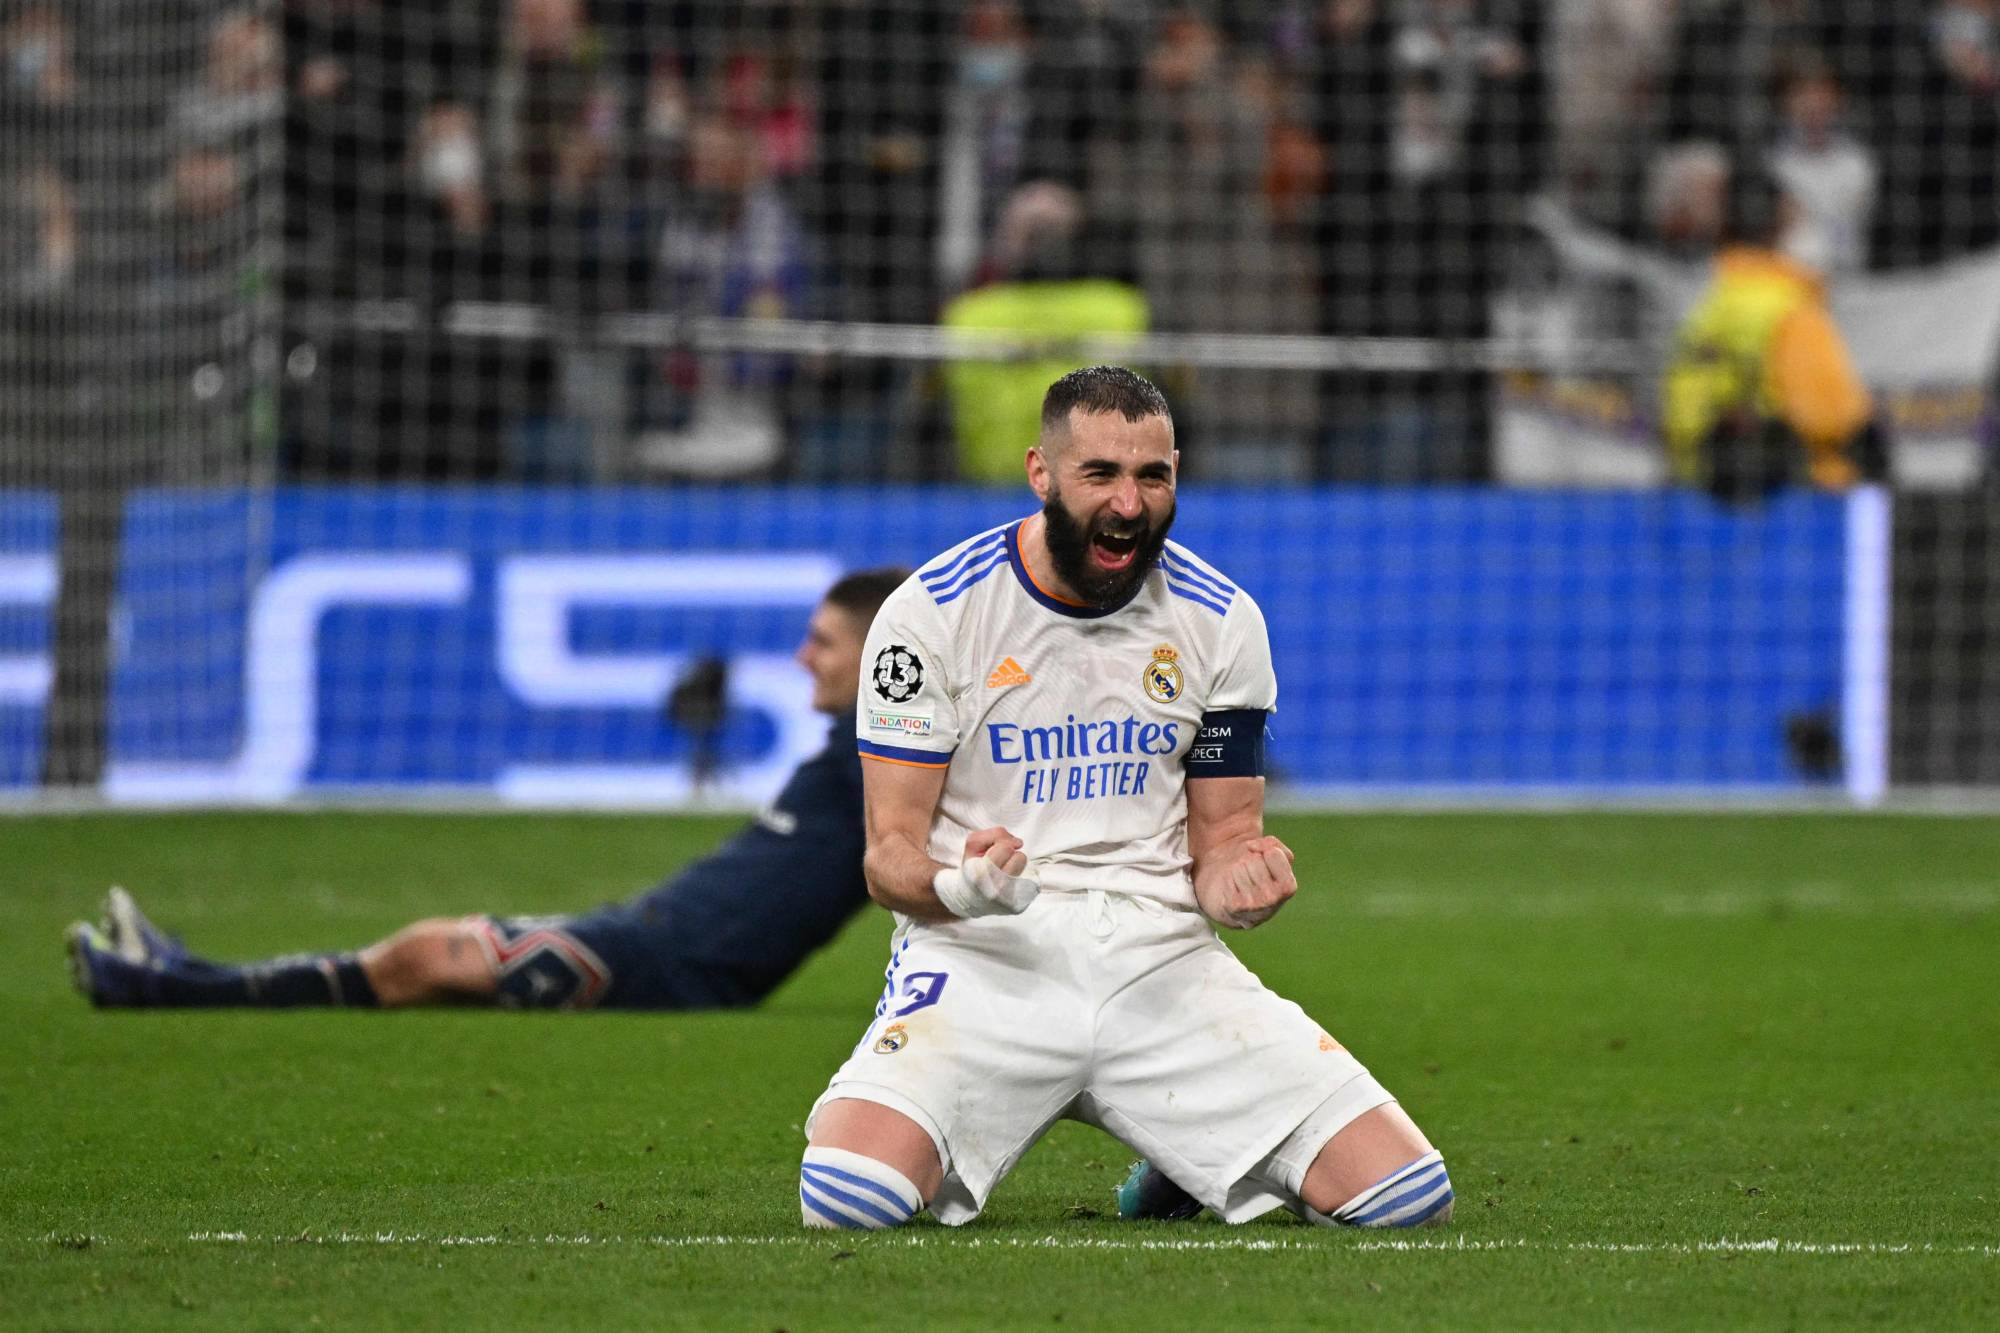 Benzema hat-trick inspires Real Madrid comeback win over PSG